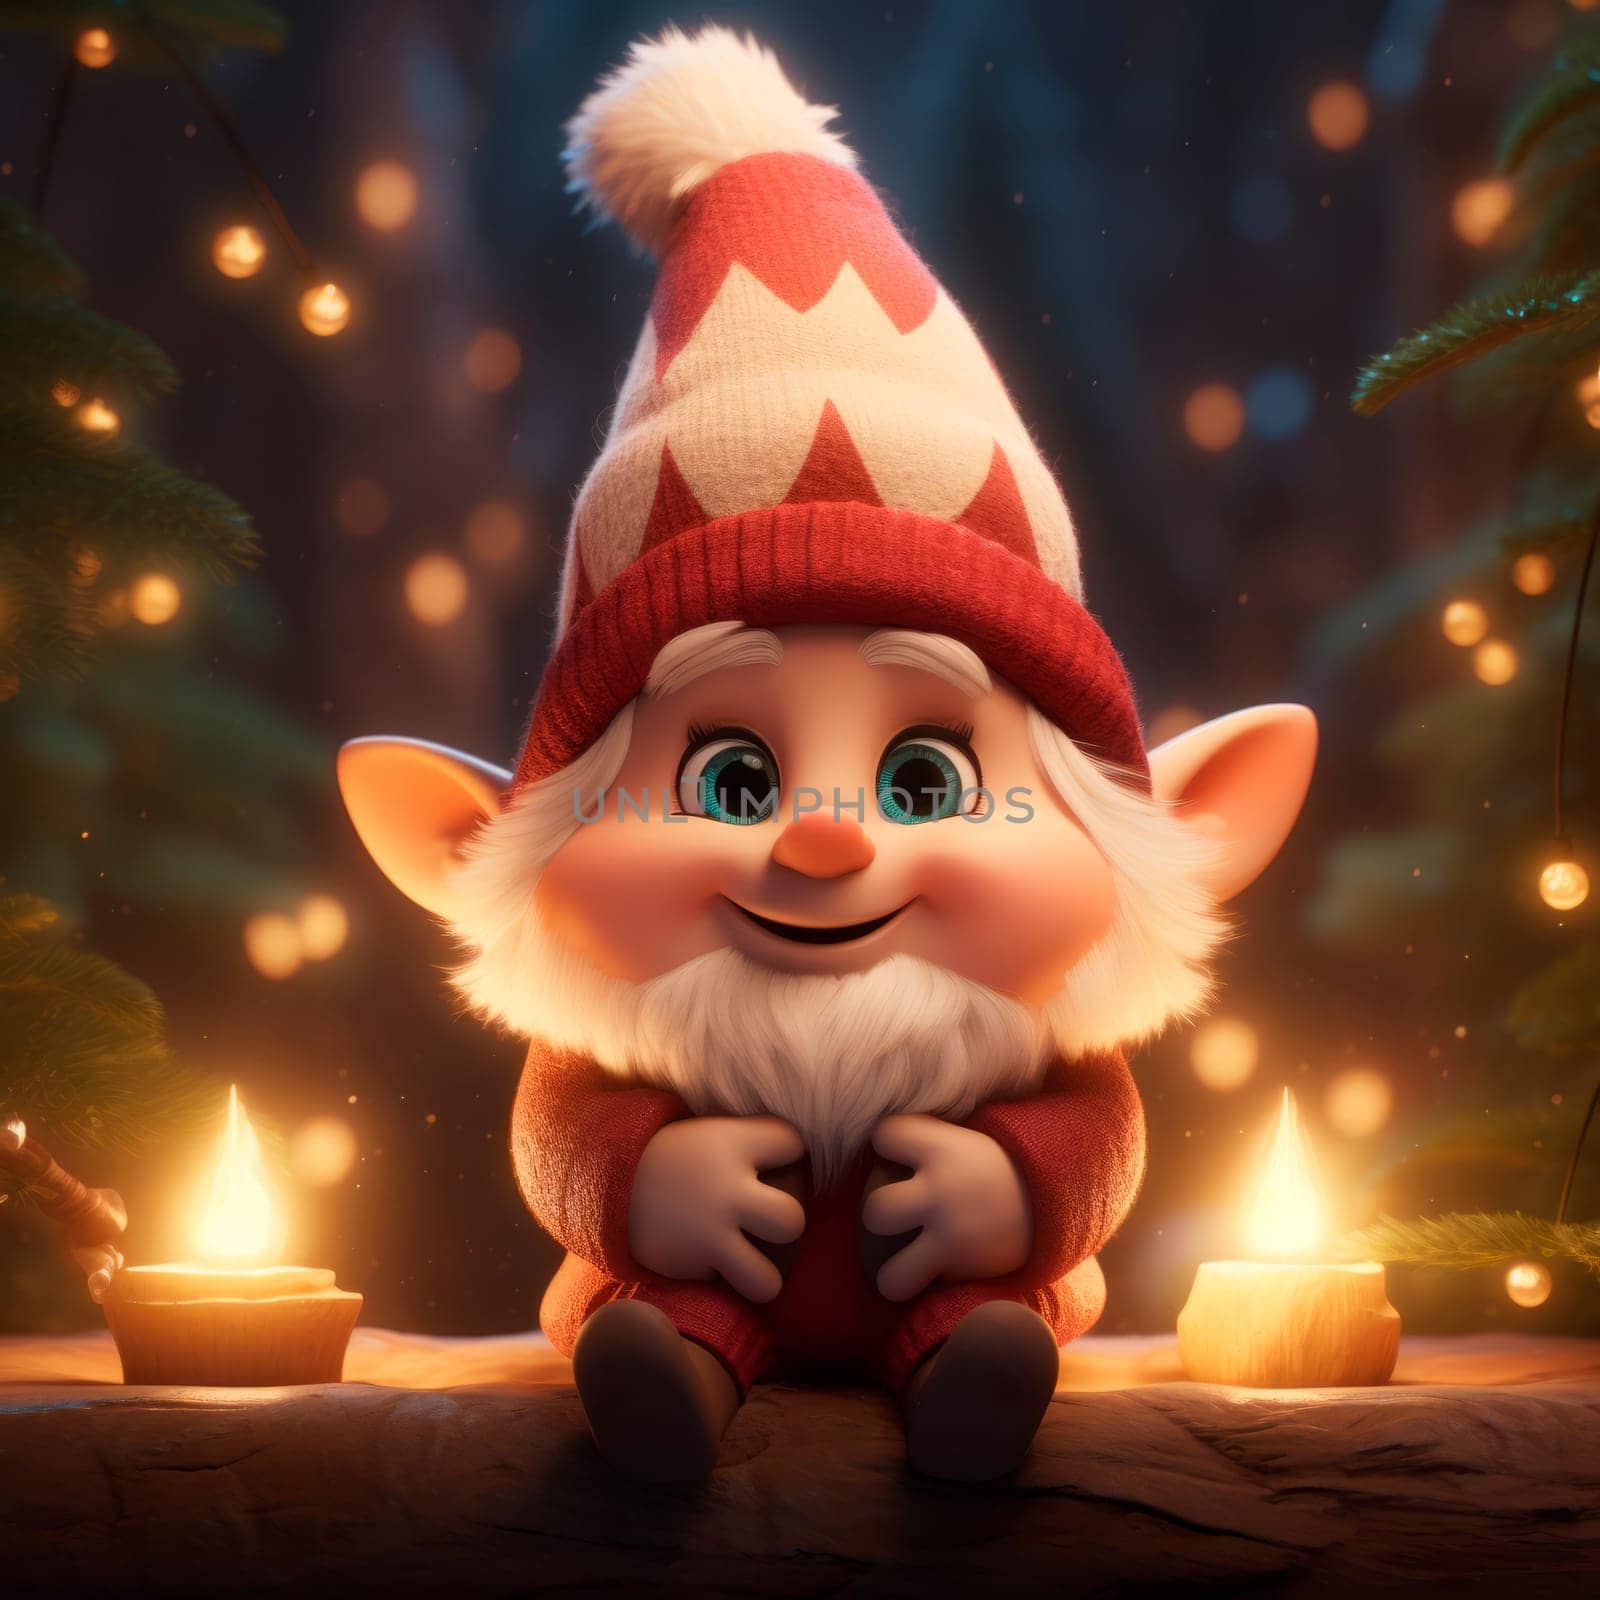 Cute Christmas gnome on a New Year's background. by Spirina